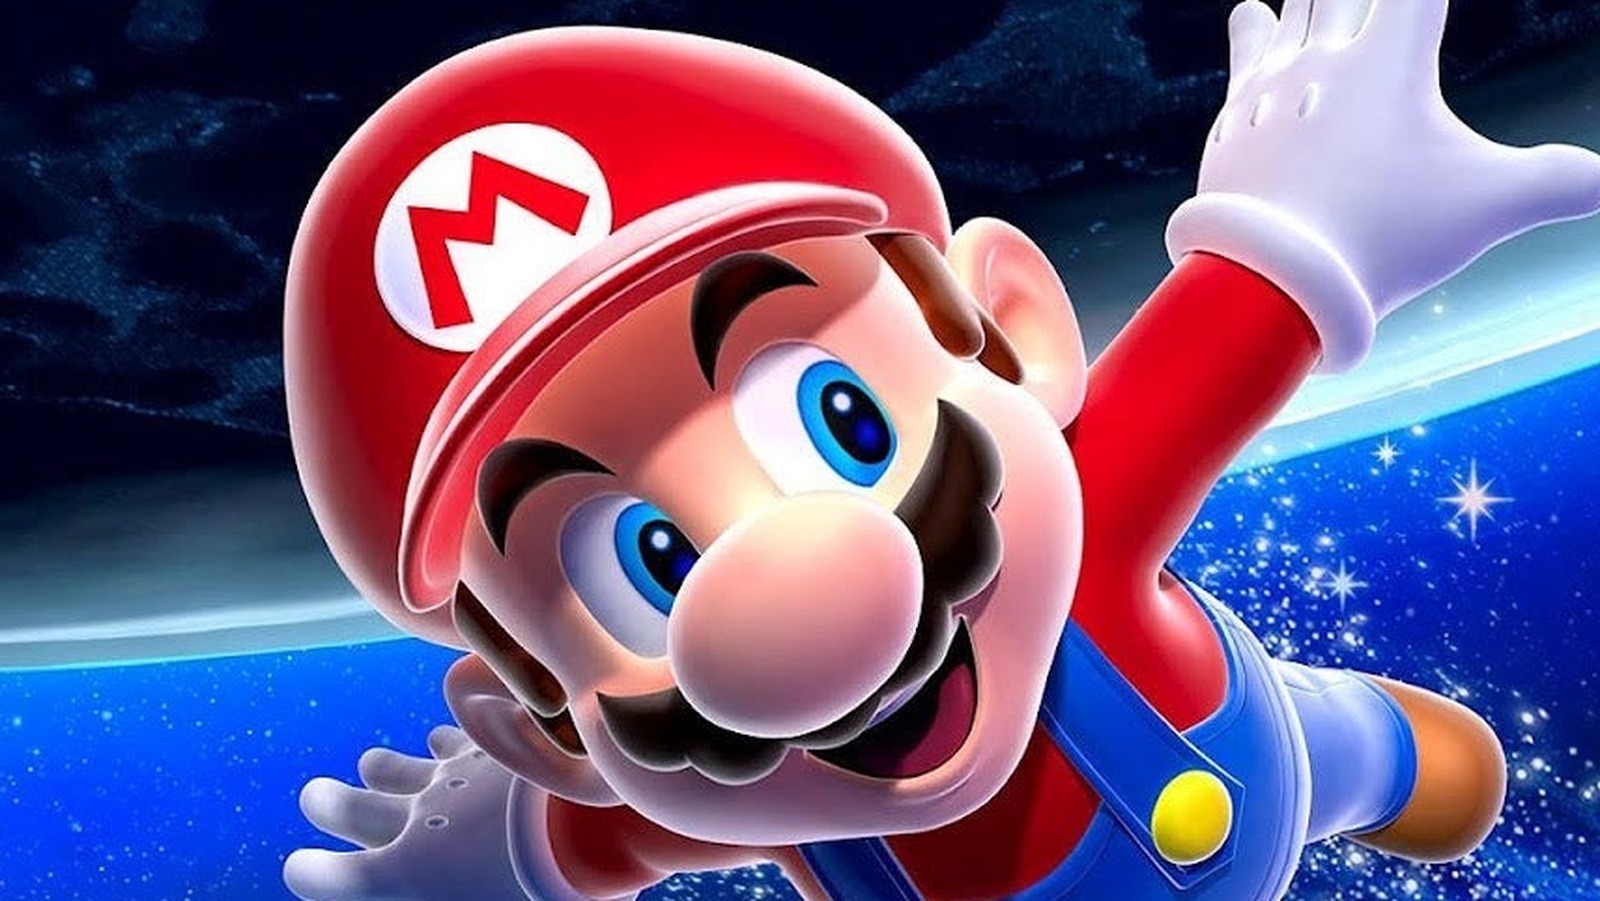 Mario Games We Want Ported To Nintendo Switch - GameSpot